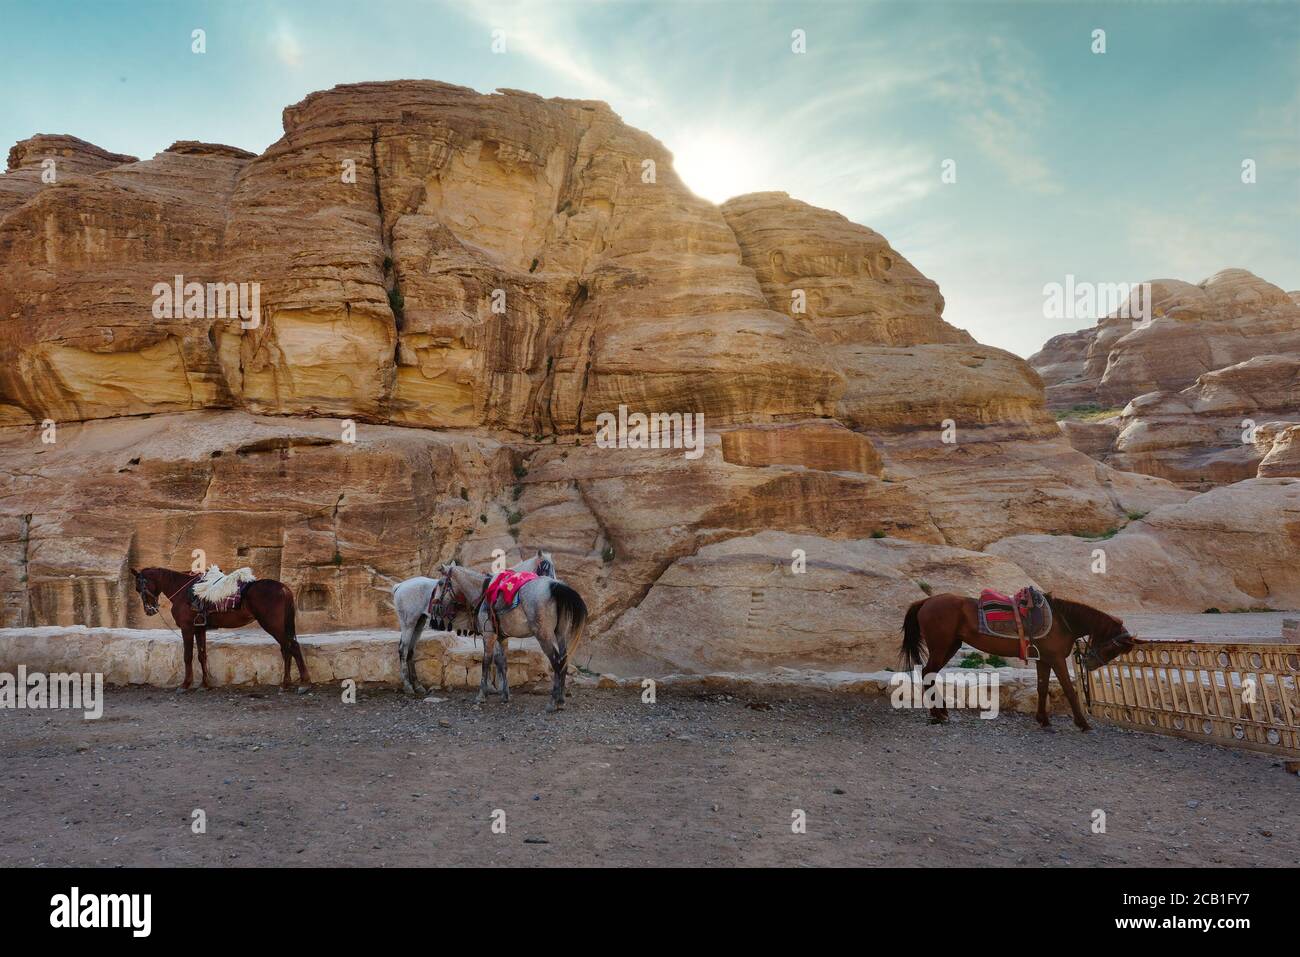 Horse with tasseled saddle in the entrance to Petra, Jordan Stock Photo